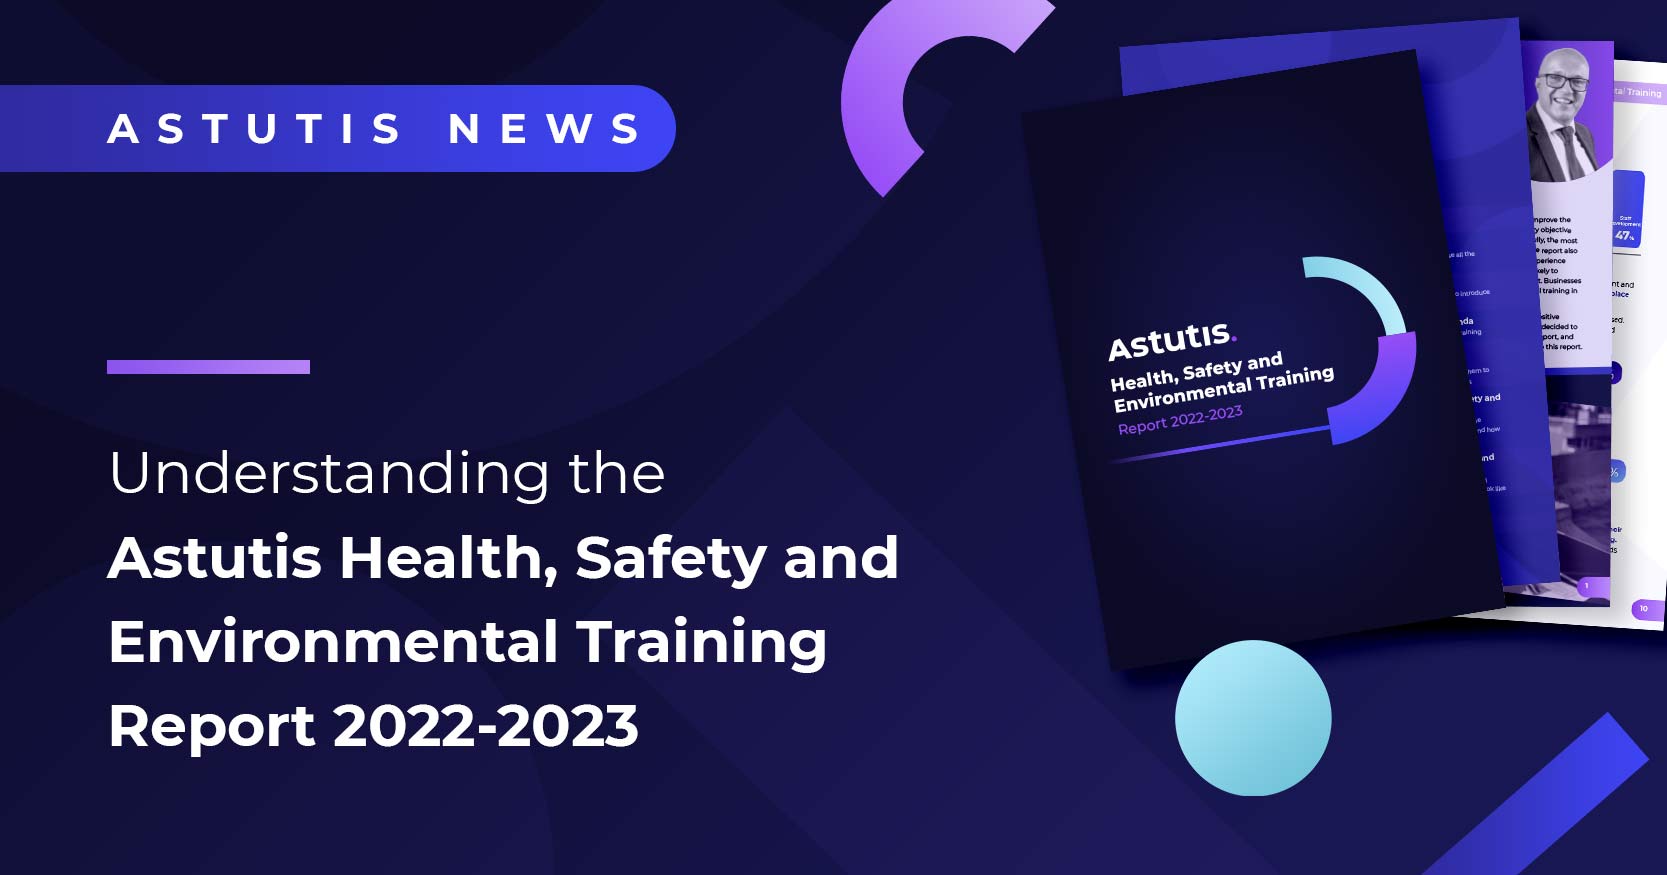 Understanding the Astutis Health, Safety and Environmental Training Report 2022-2023 Image